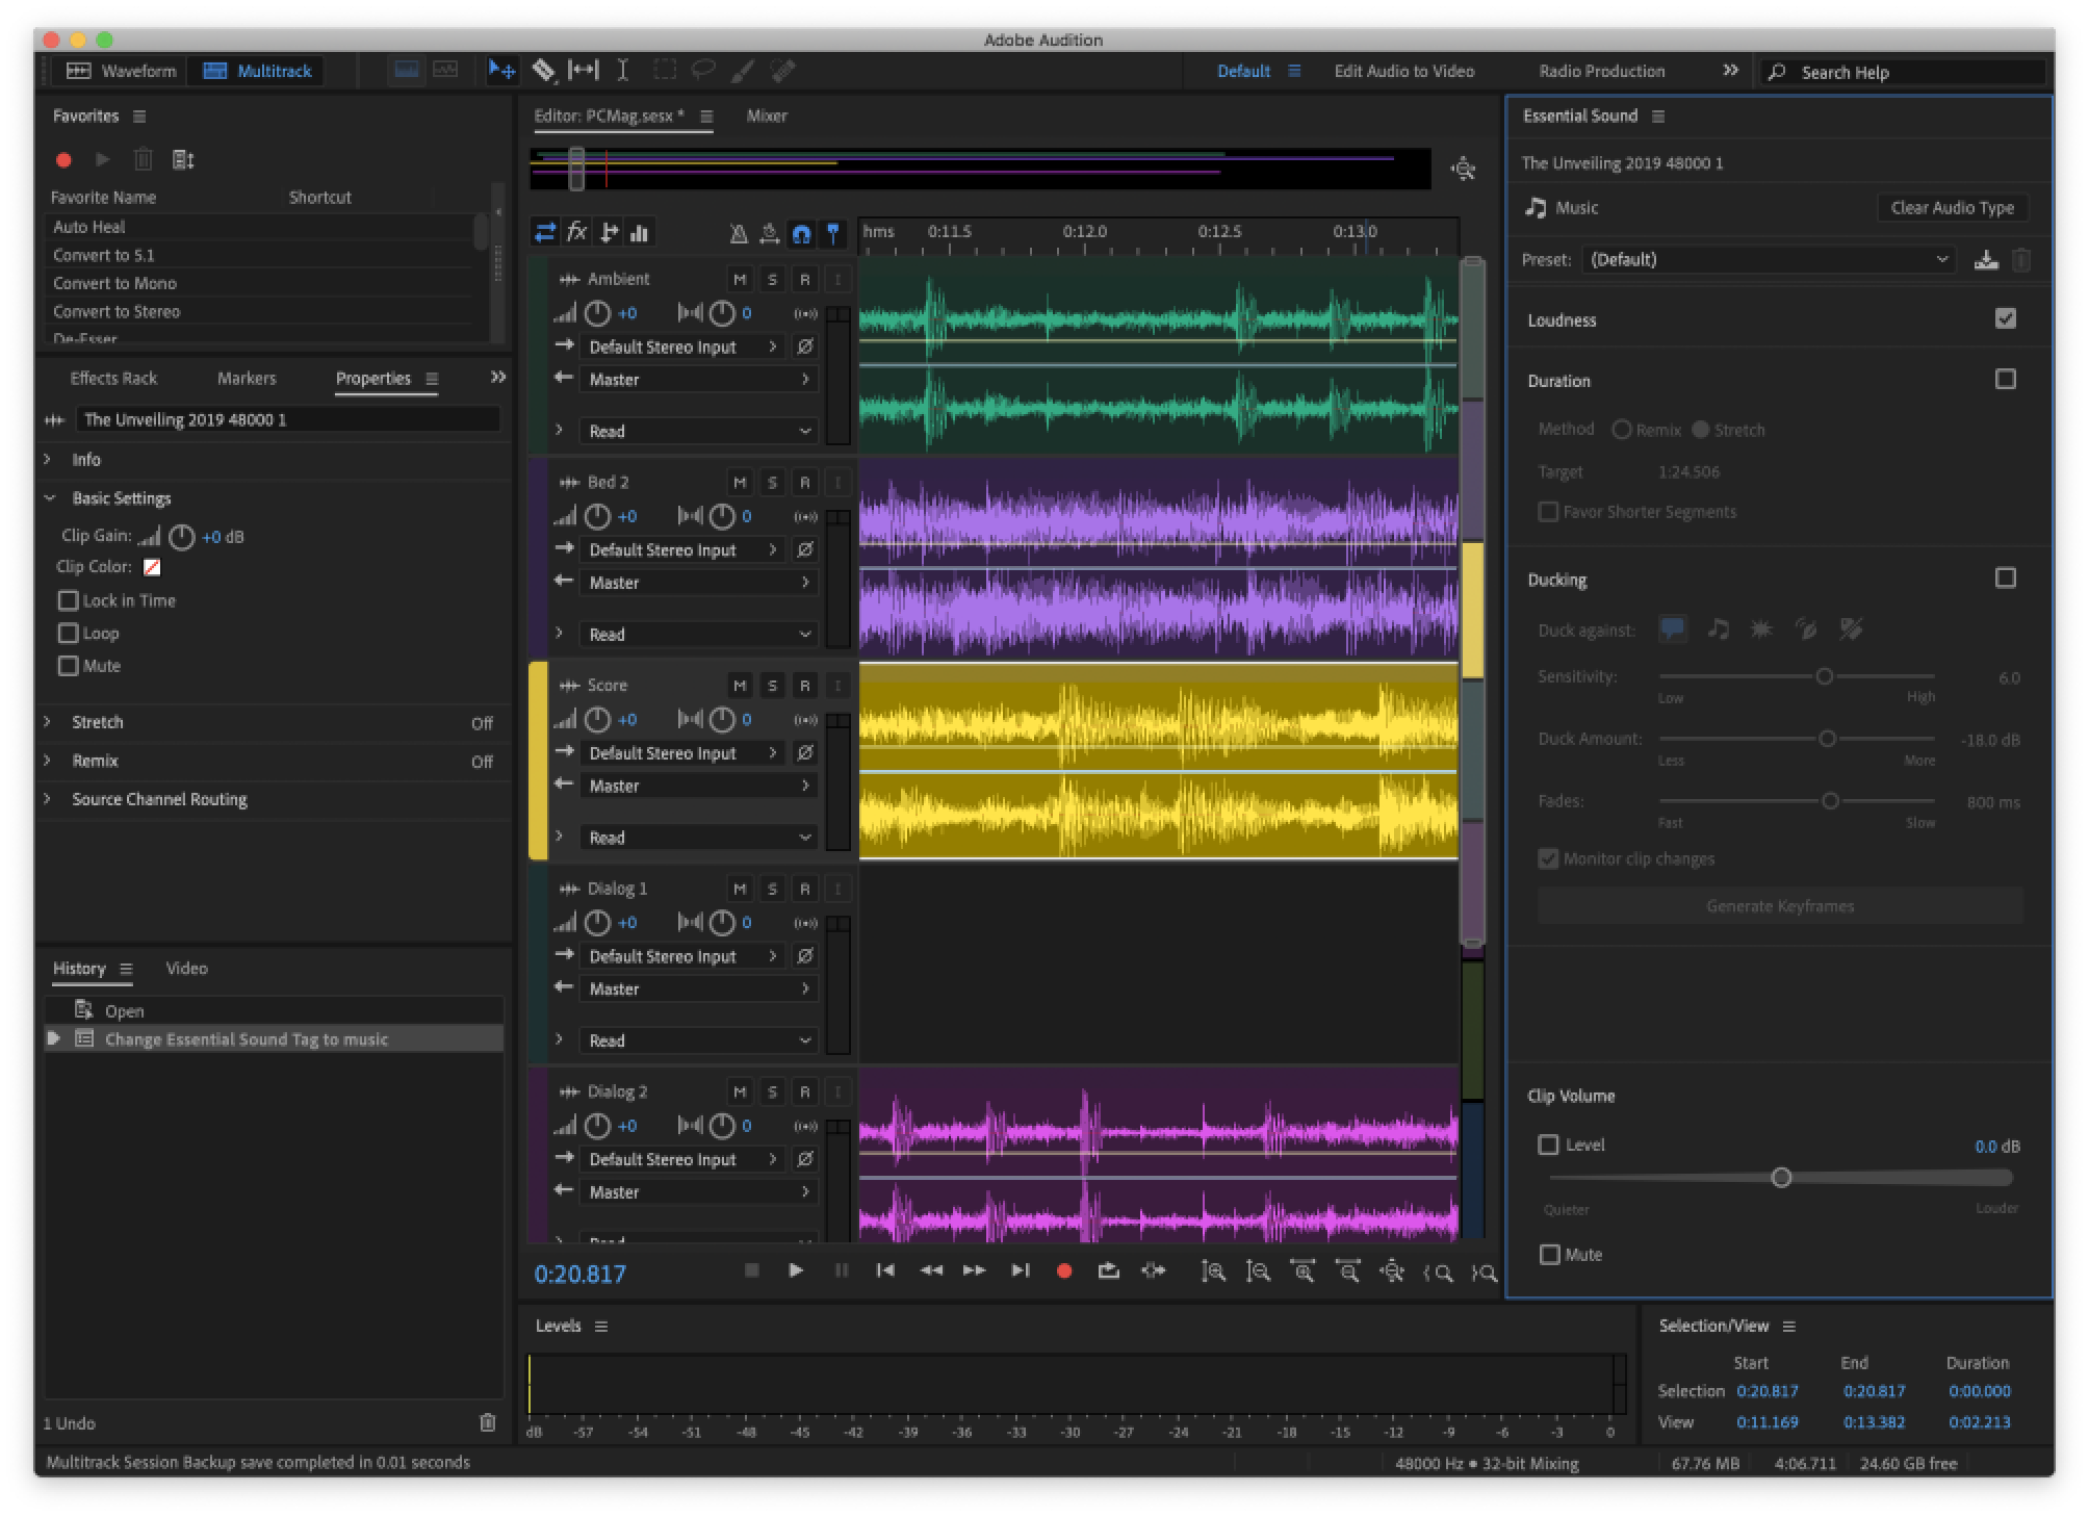 adobe audition 3.0 free download full version